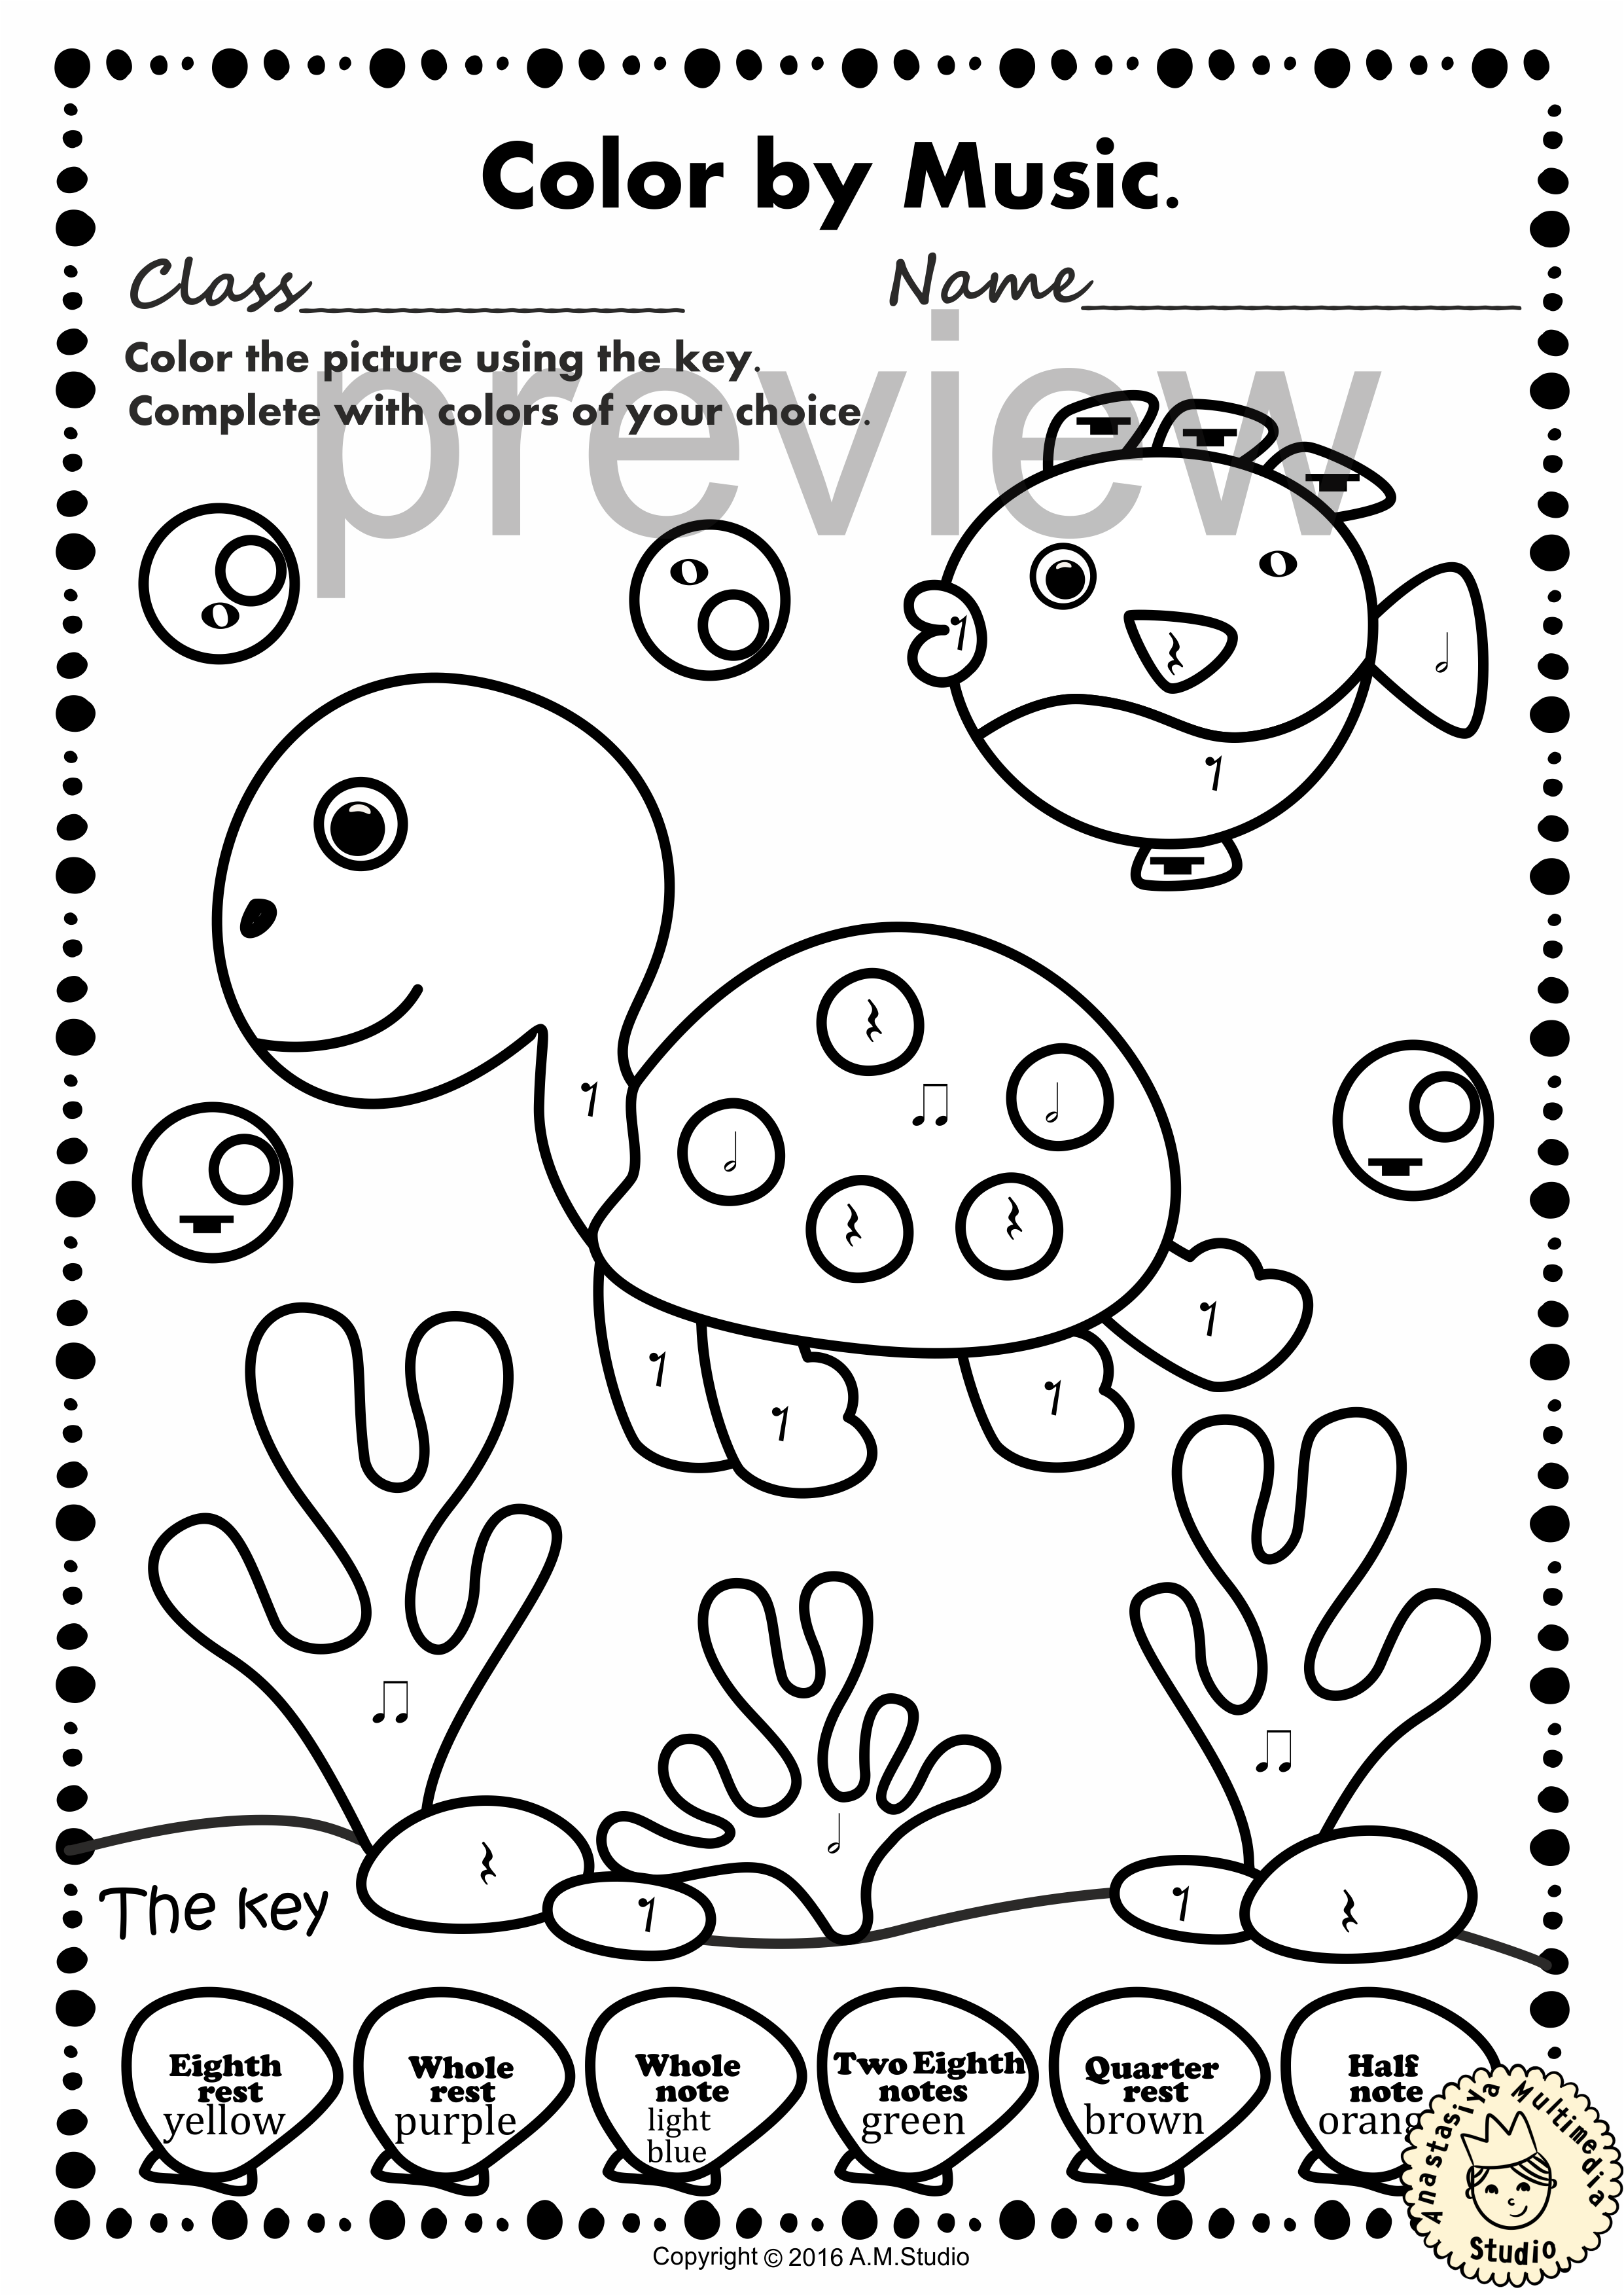 Ocean Animals Music Coloring Pages & Worksheets | Color by Notes and Rests (img # 2)